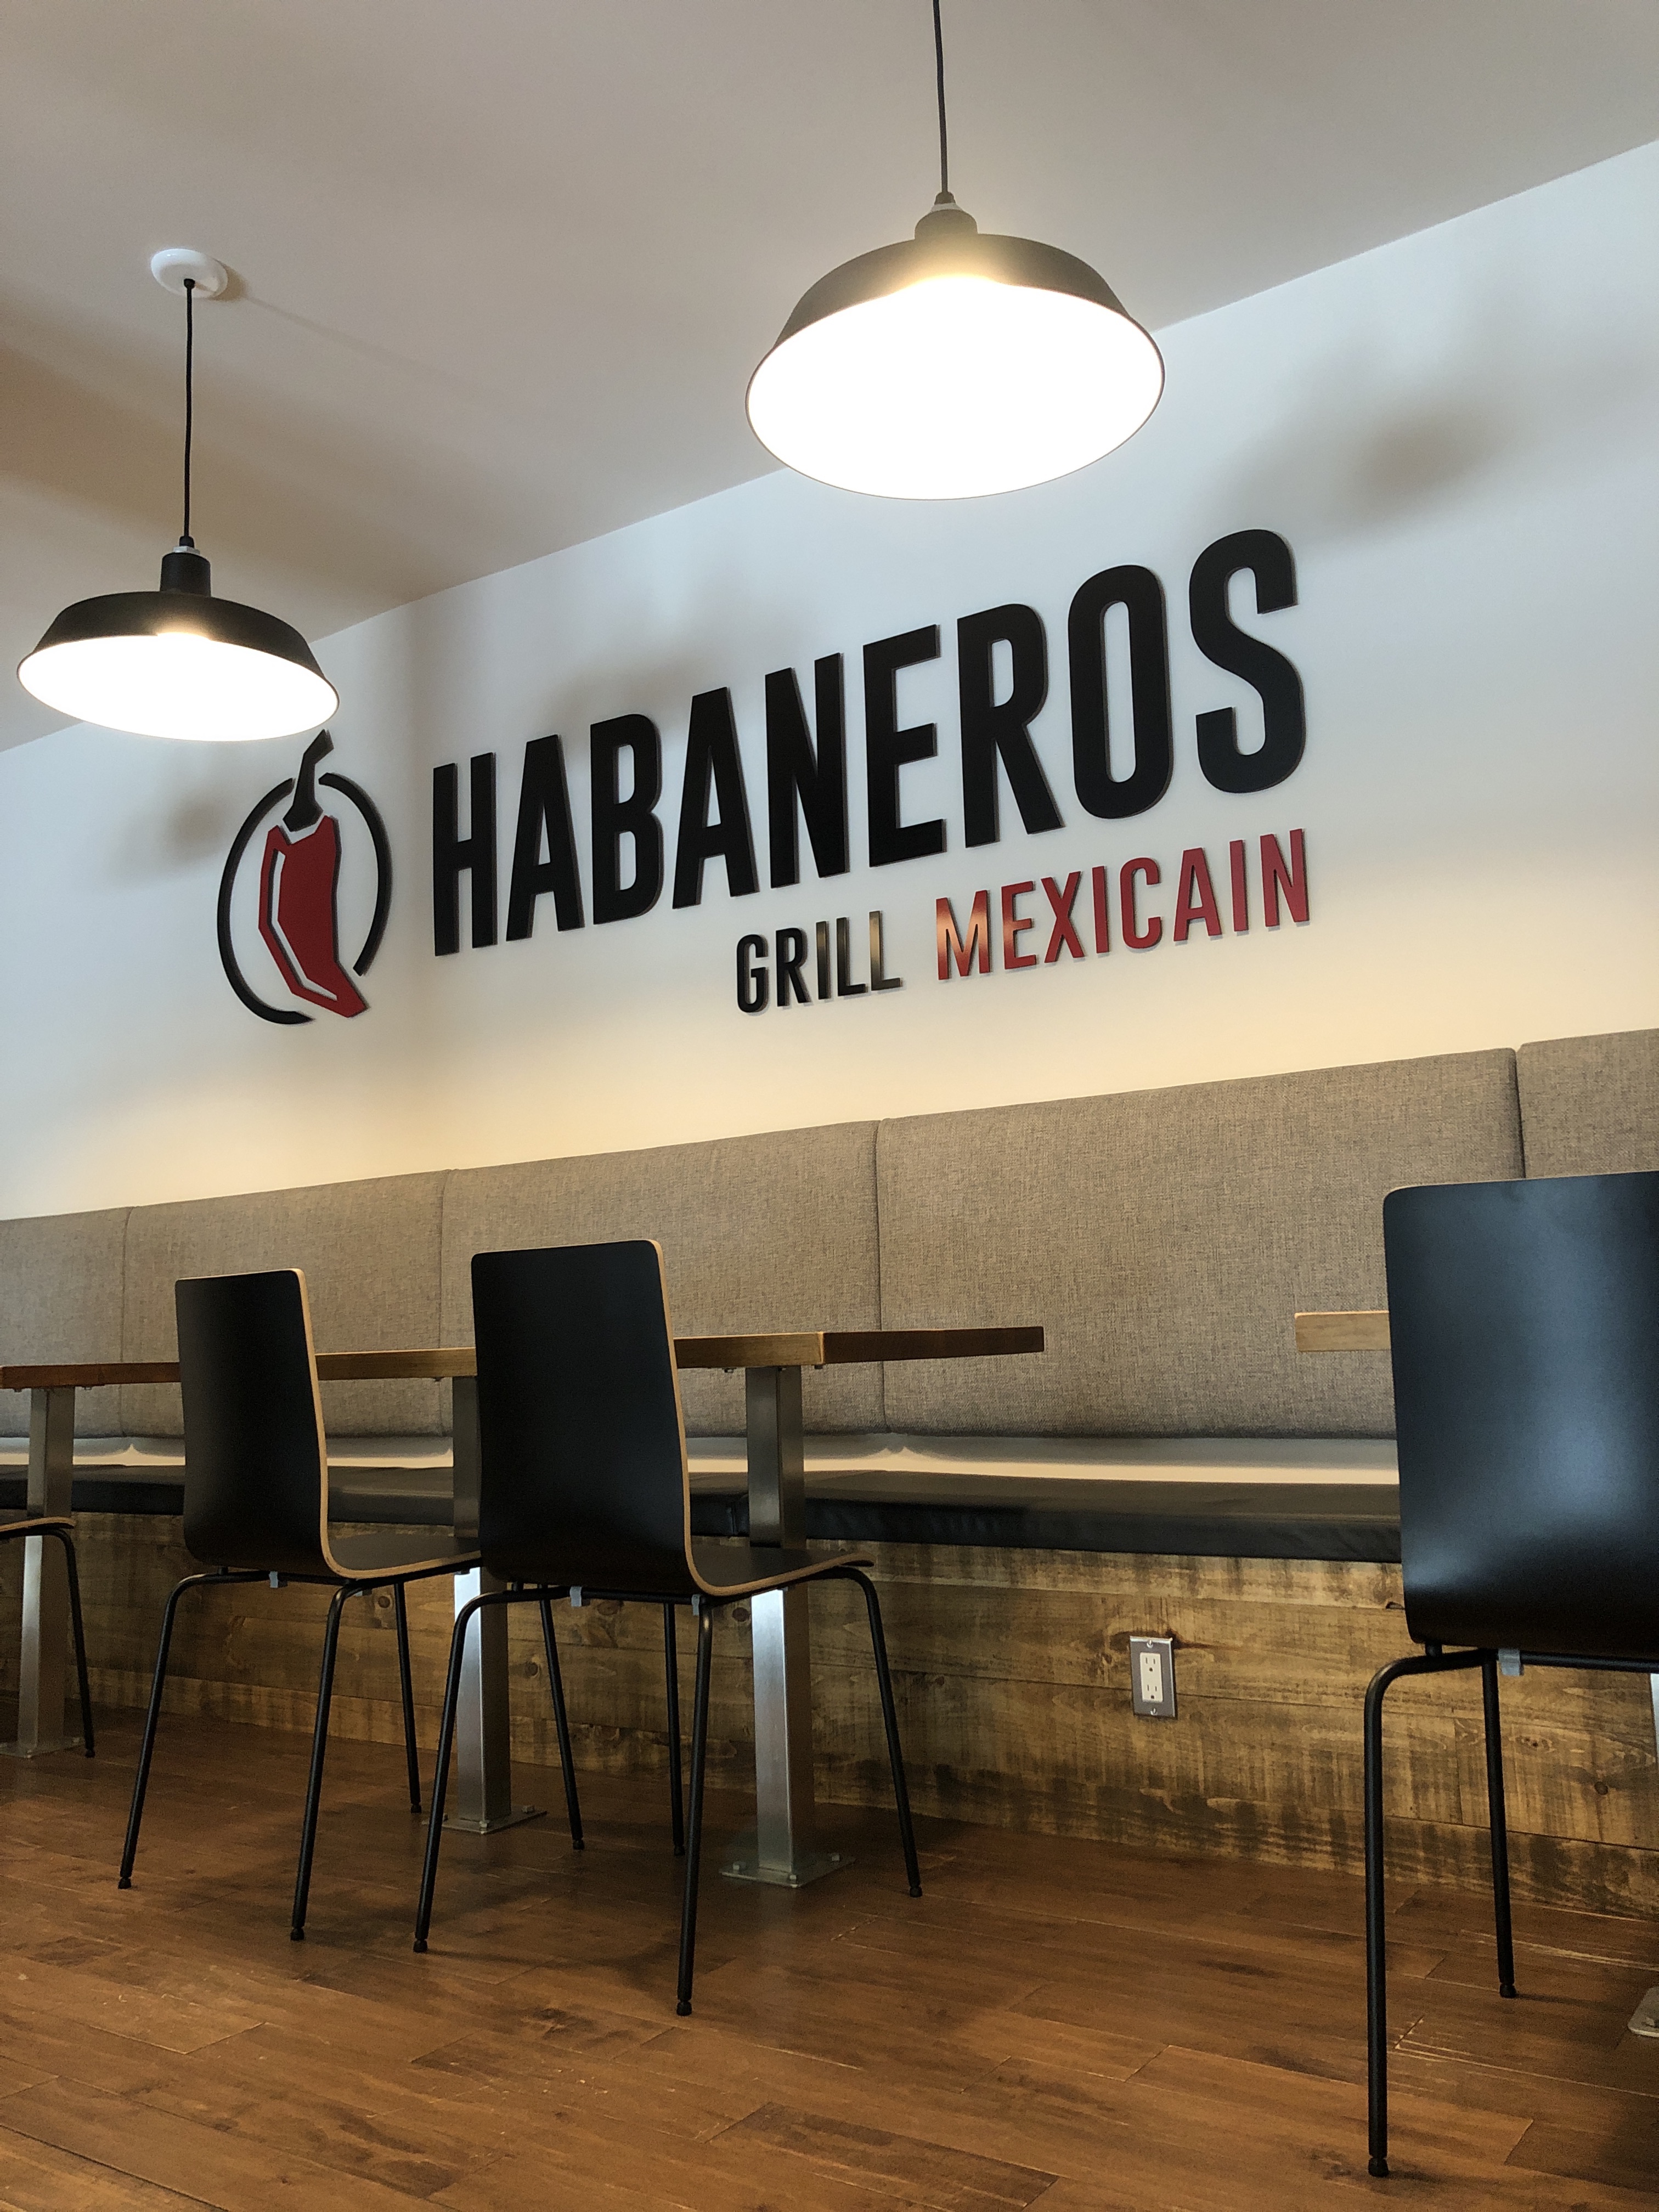 Habaneros grill mexicain - Val-d'Or